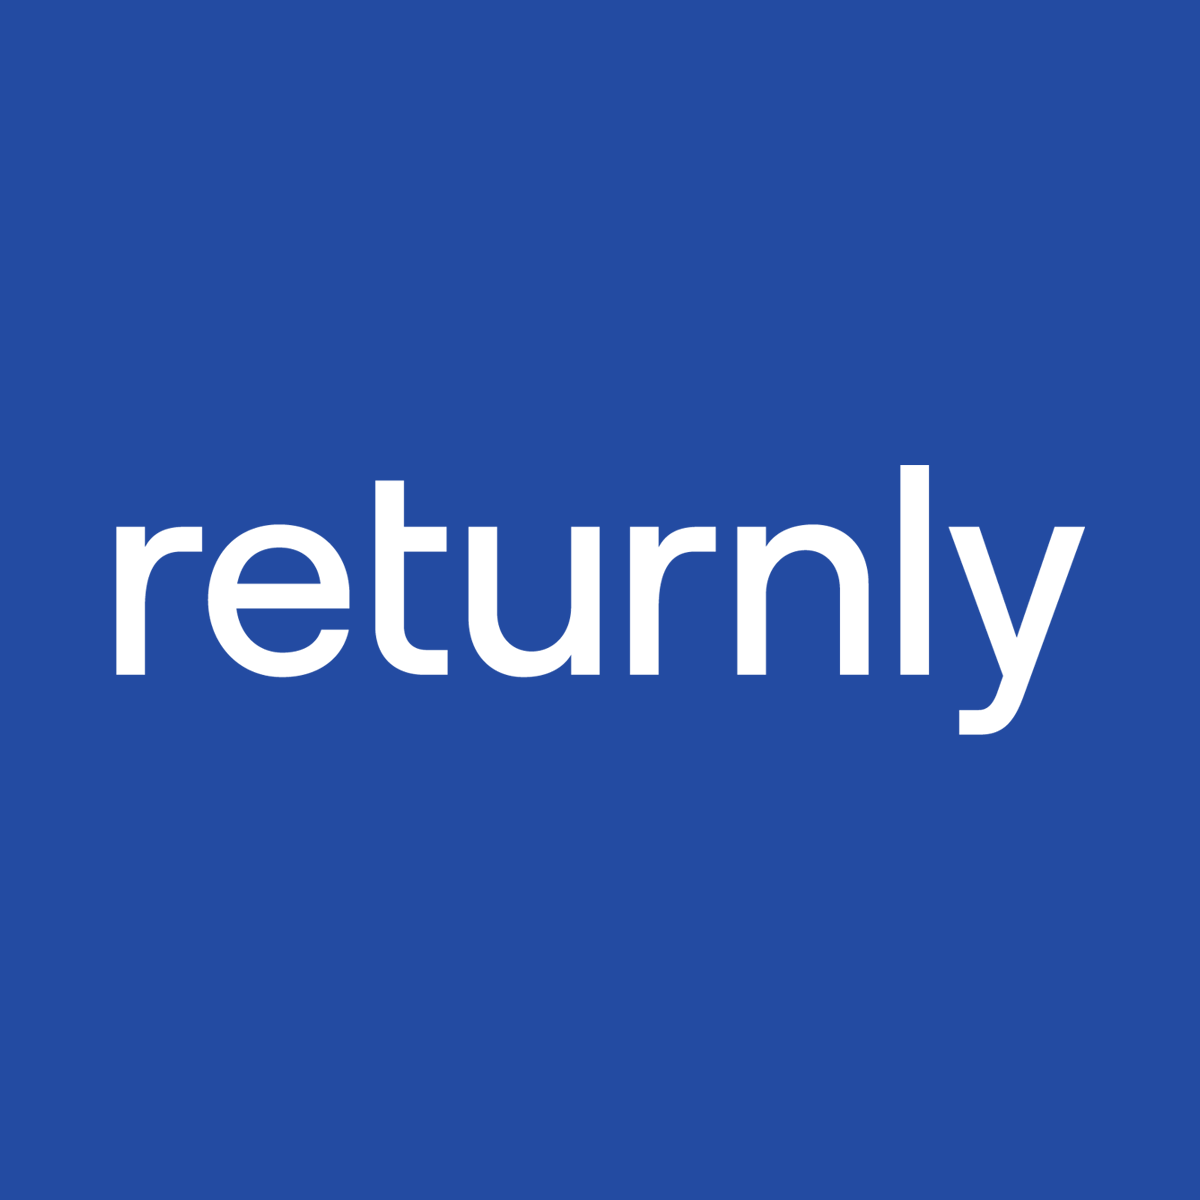 Returnly by Affirm